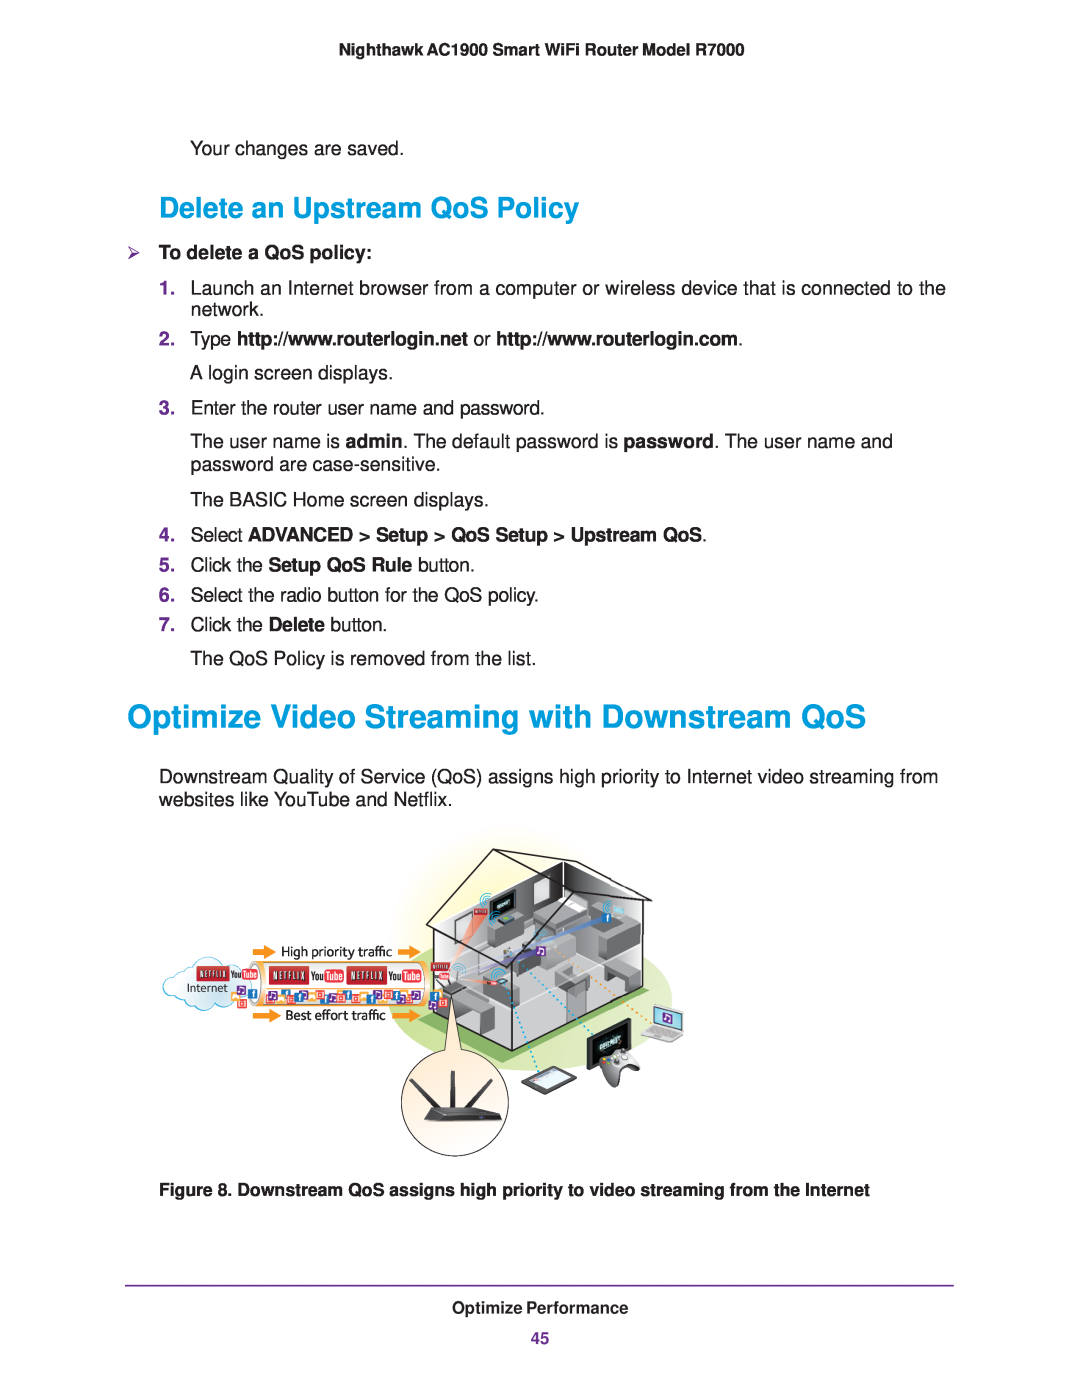 NETGEAR R7000 Optimize Video Streaming with Downstream QoS, Delete an Upstream QoS Policy,  To delete a QoS policy 